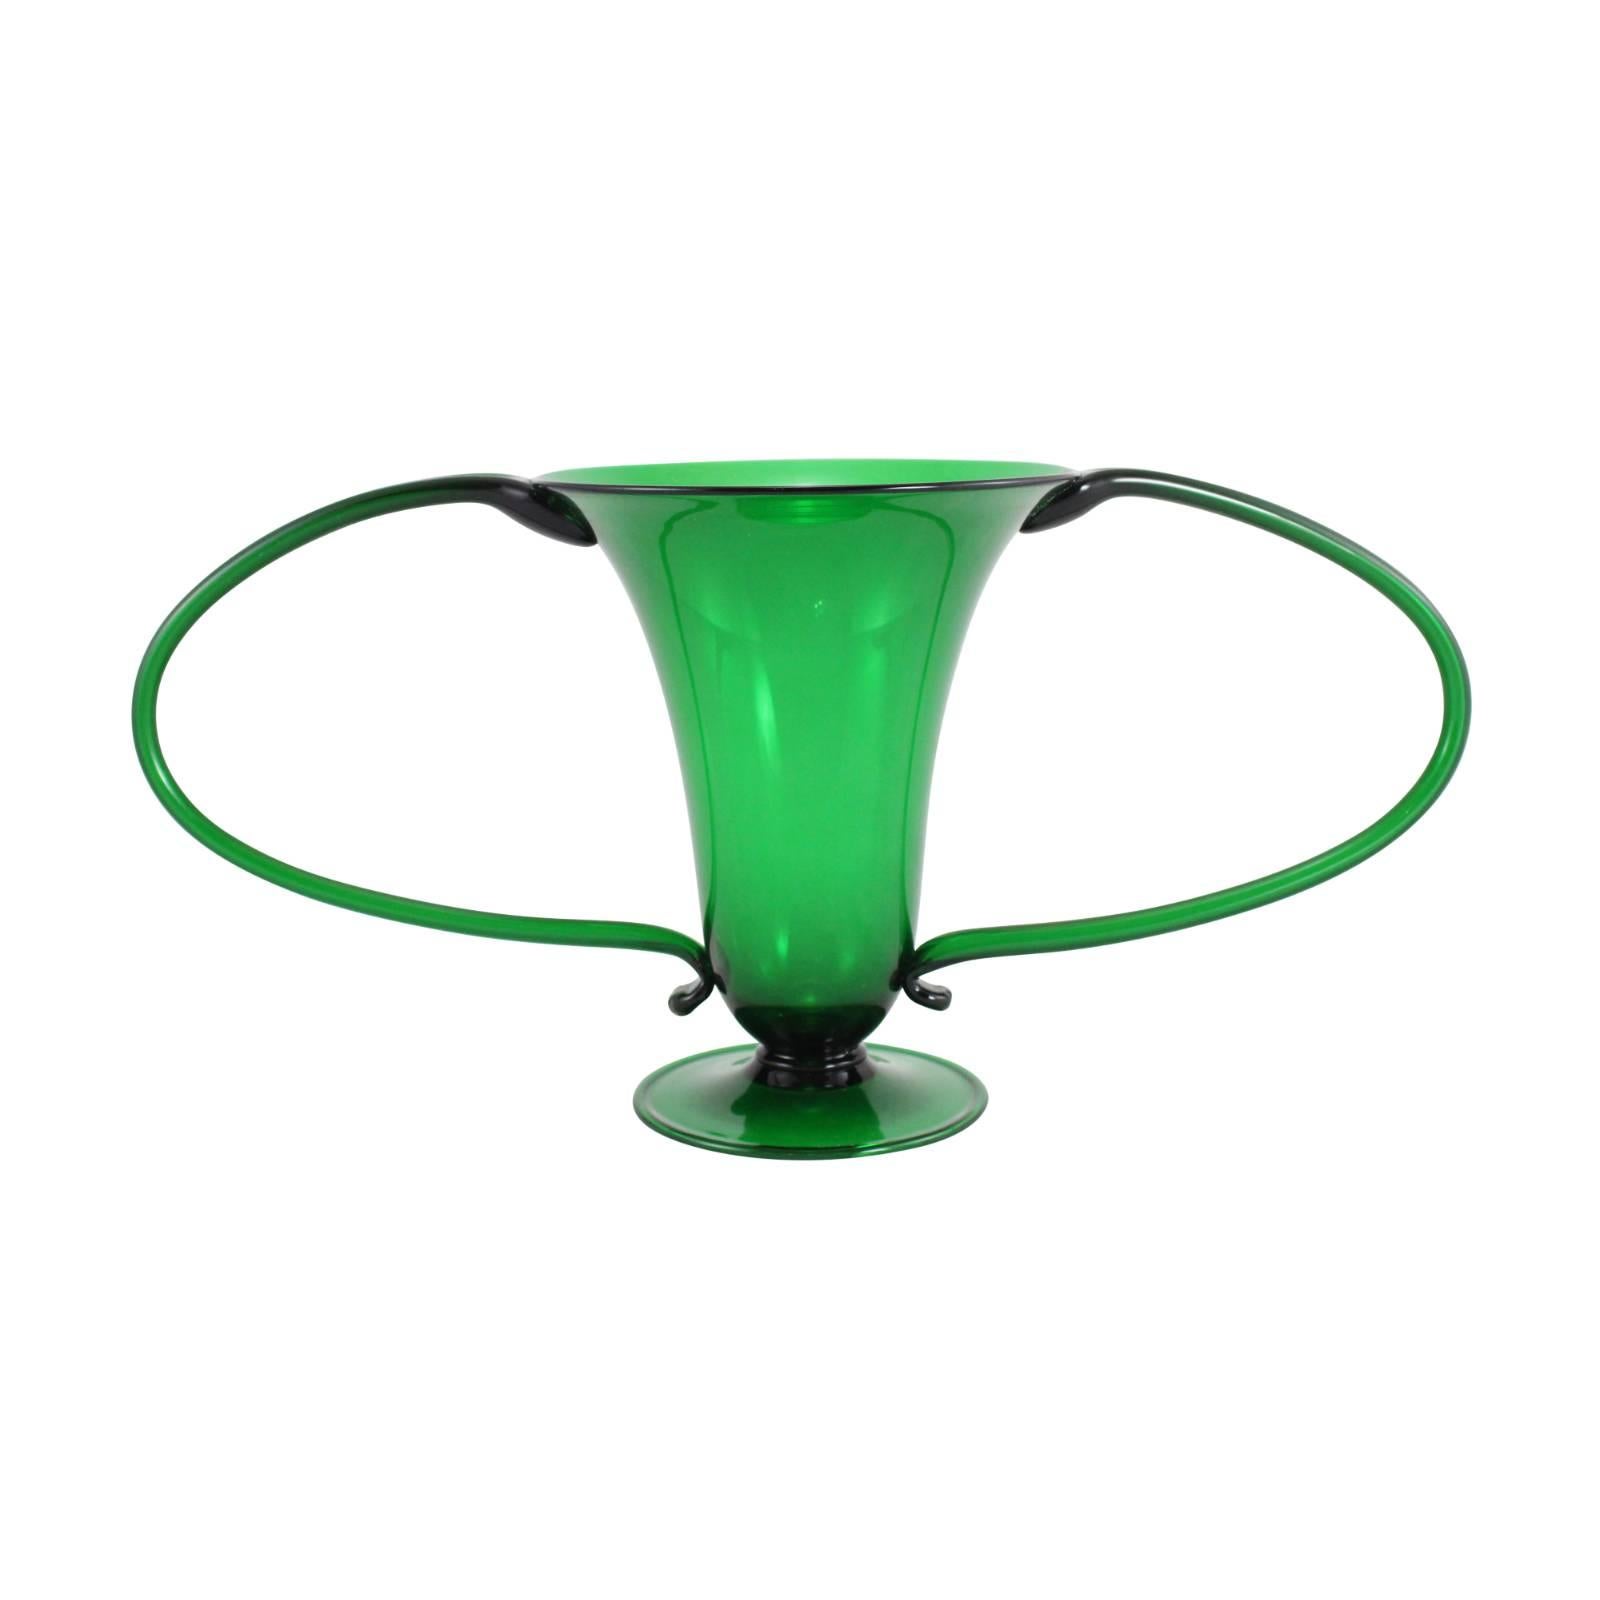 Italian art glass designed by Vittorio Zecchin and produced by Venini in Venice in the 1920s. This piece was inspired by the dragonfly and crafted from very thin blown green glass.